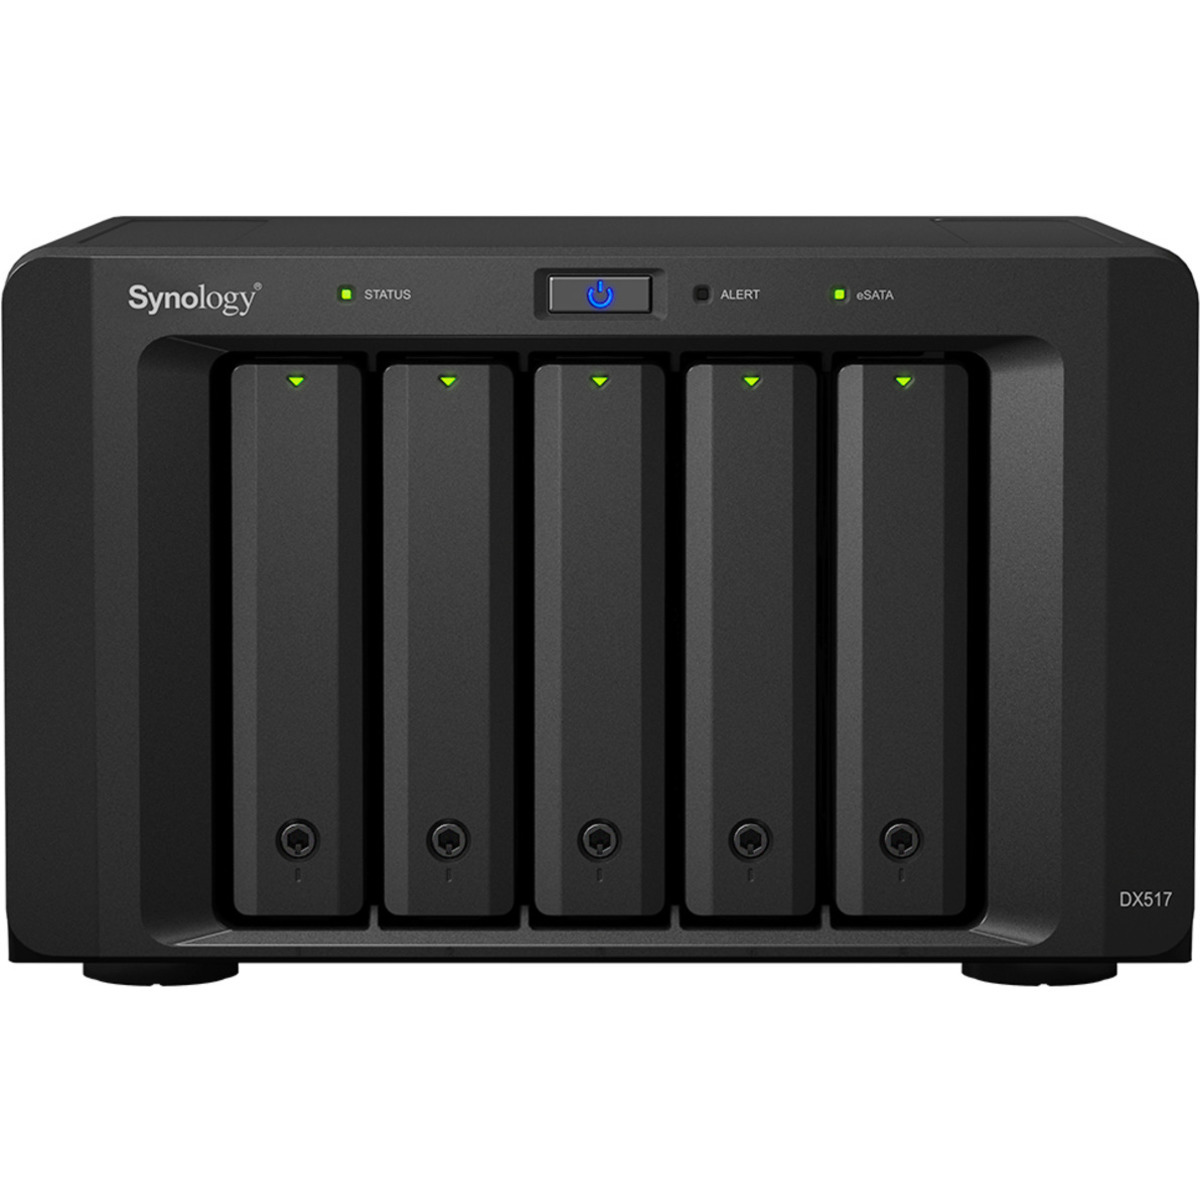 Synology DX517 External Expansion Drive 18tb 5-Bay Desktop Multimedia / Power User / Business Expansion Enclosure 3x6tb Synology Plus Series HAT3300-6T 3.5 5400rmp SATA 6Gb/s HDD NAS Class Drives Installed - Burn-In Tested DX517 External Expansion Drive